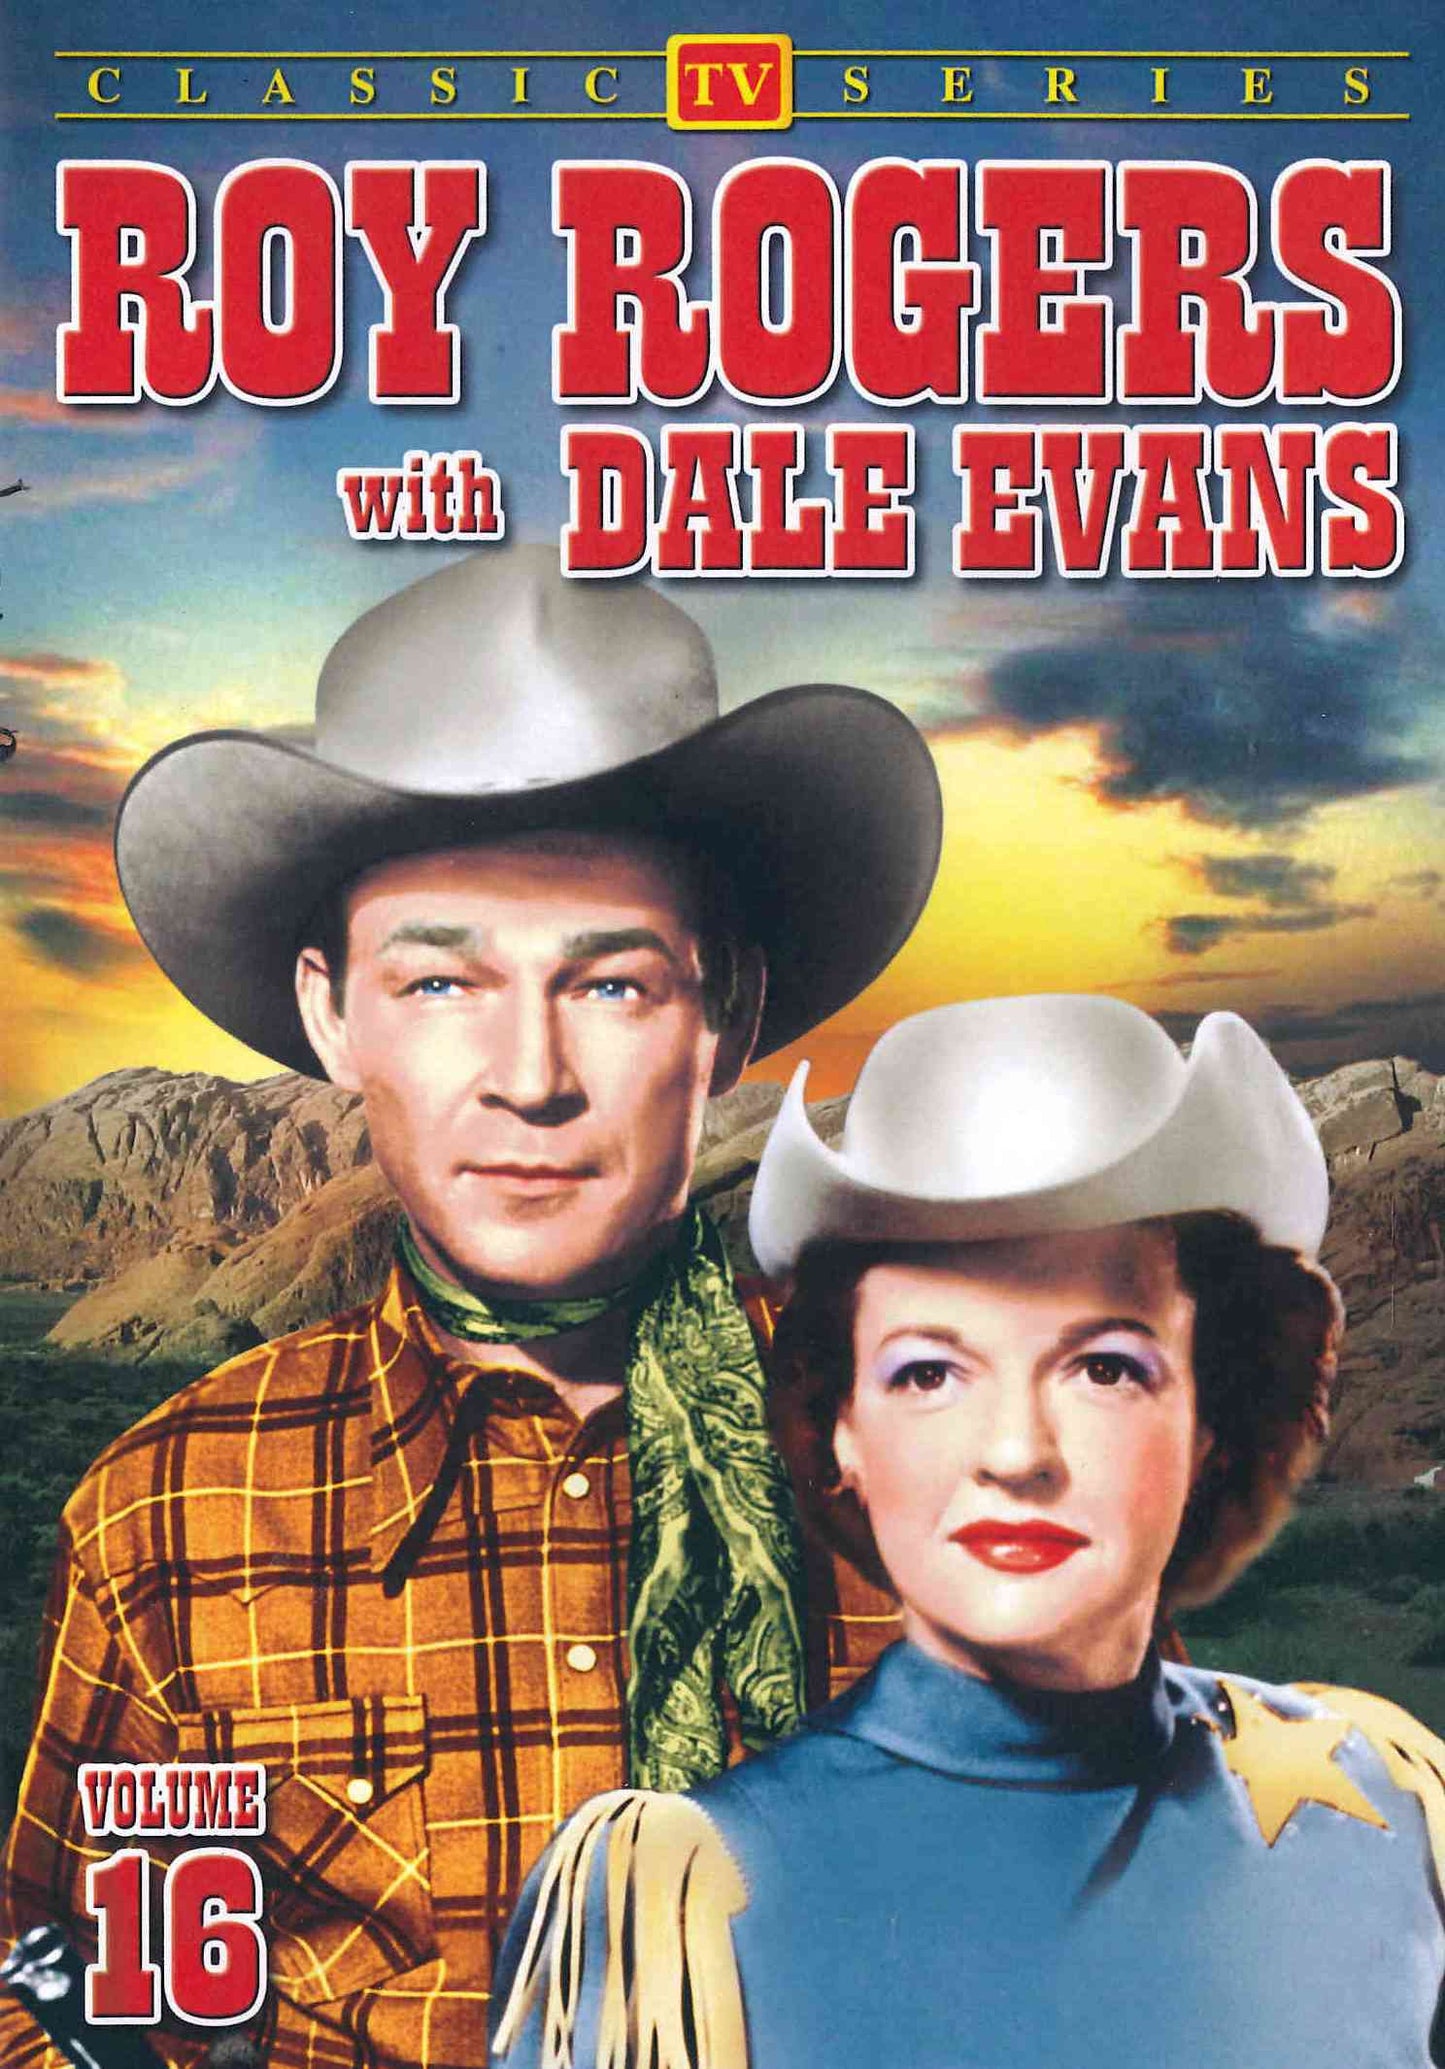 Roy Rogers with Dale Evans, Vol. 16 cover art